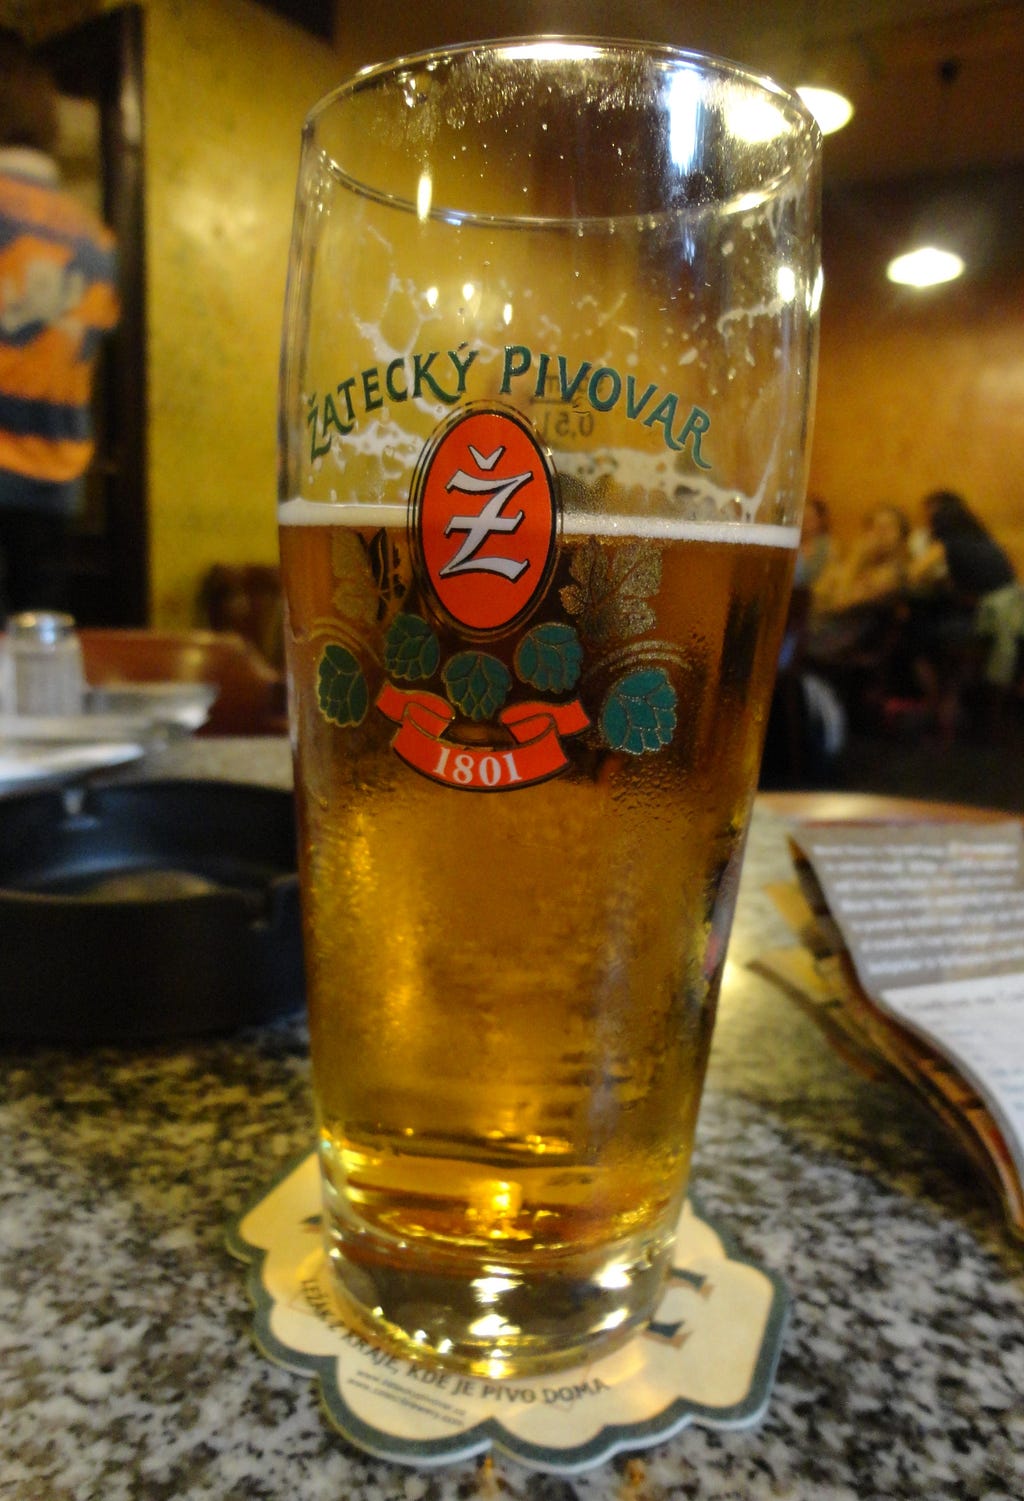 a glass of beer on a table, with the label “Zatecky Pivovar”. An ashtray is also present